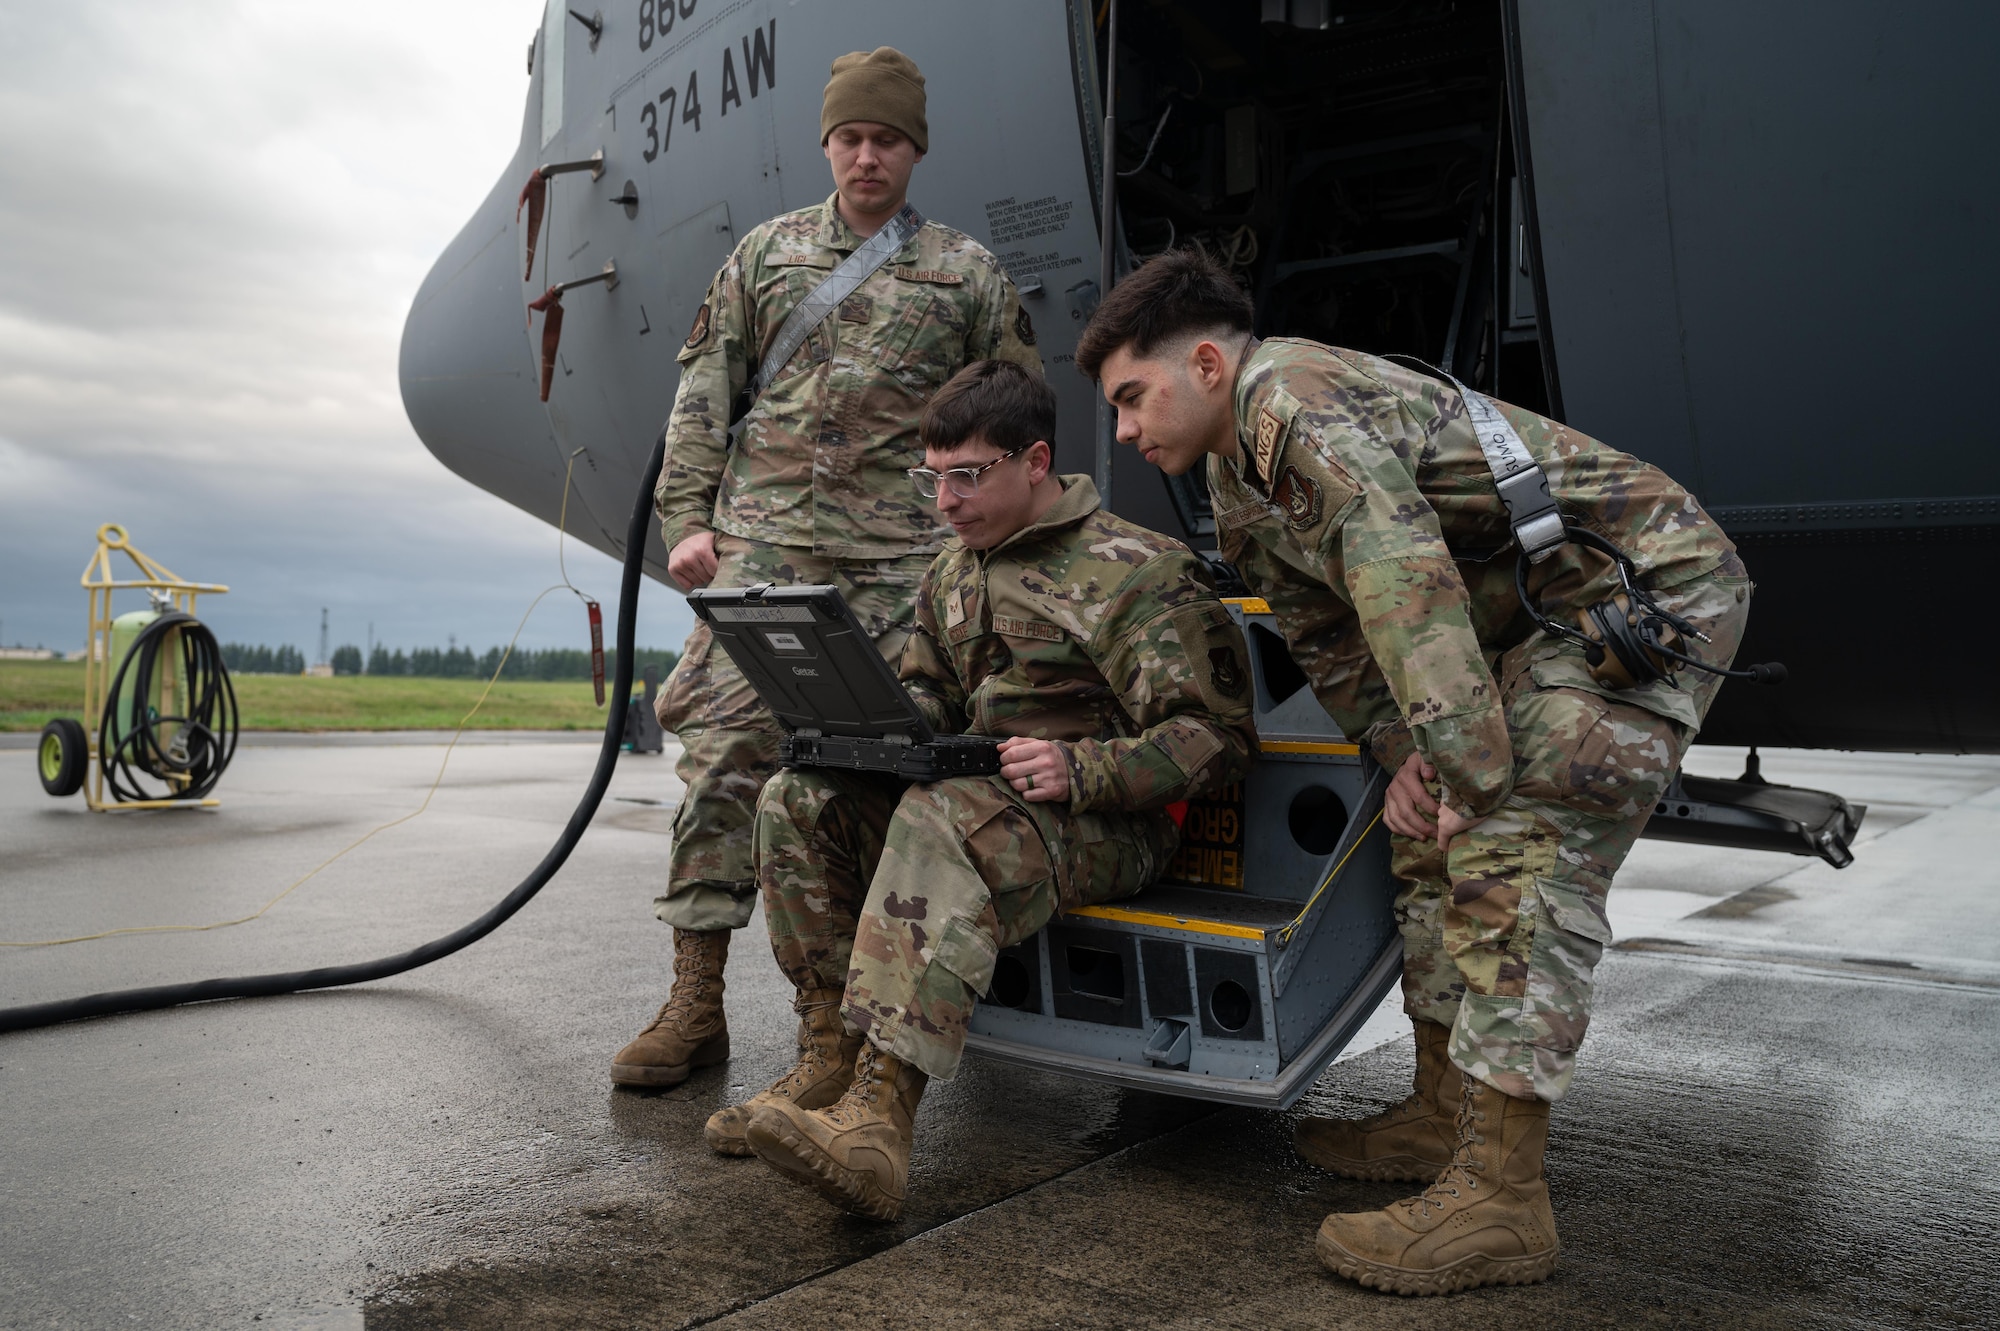 Three men look at a computer outside on a flightline by a plane.